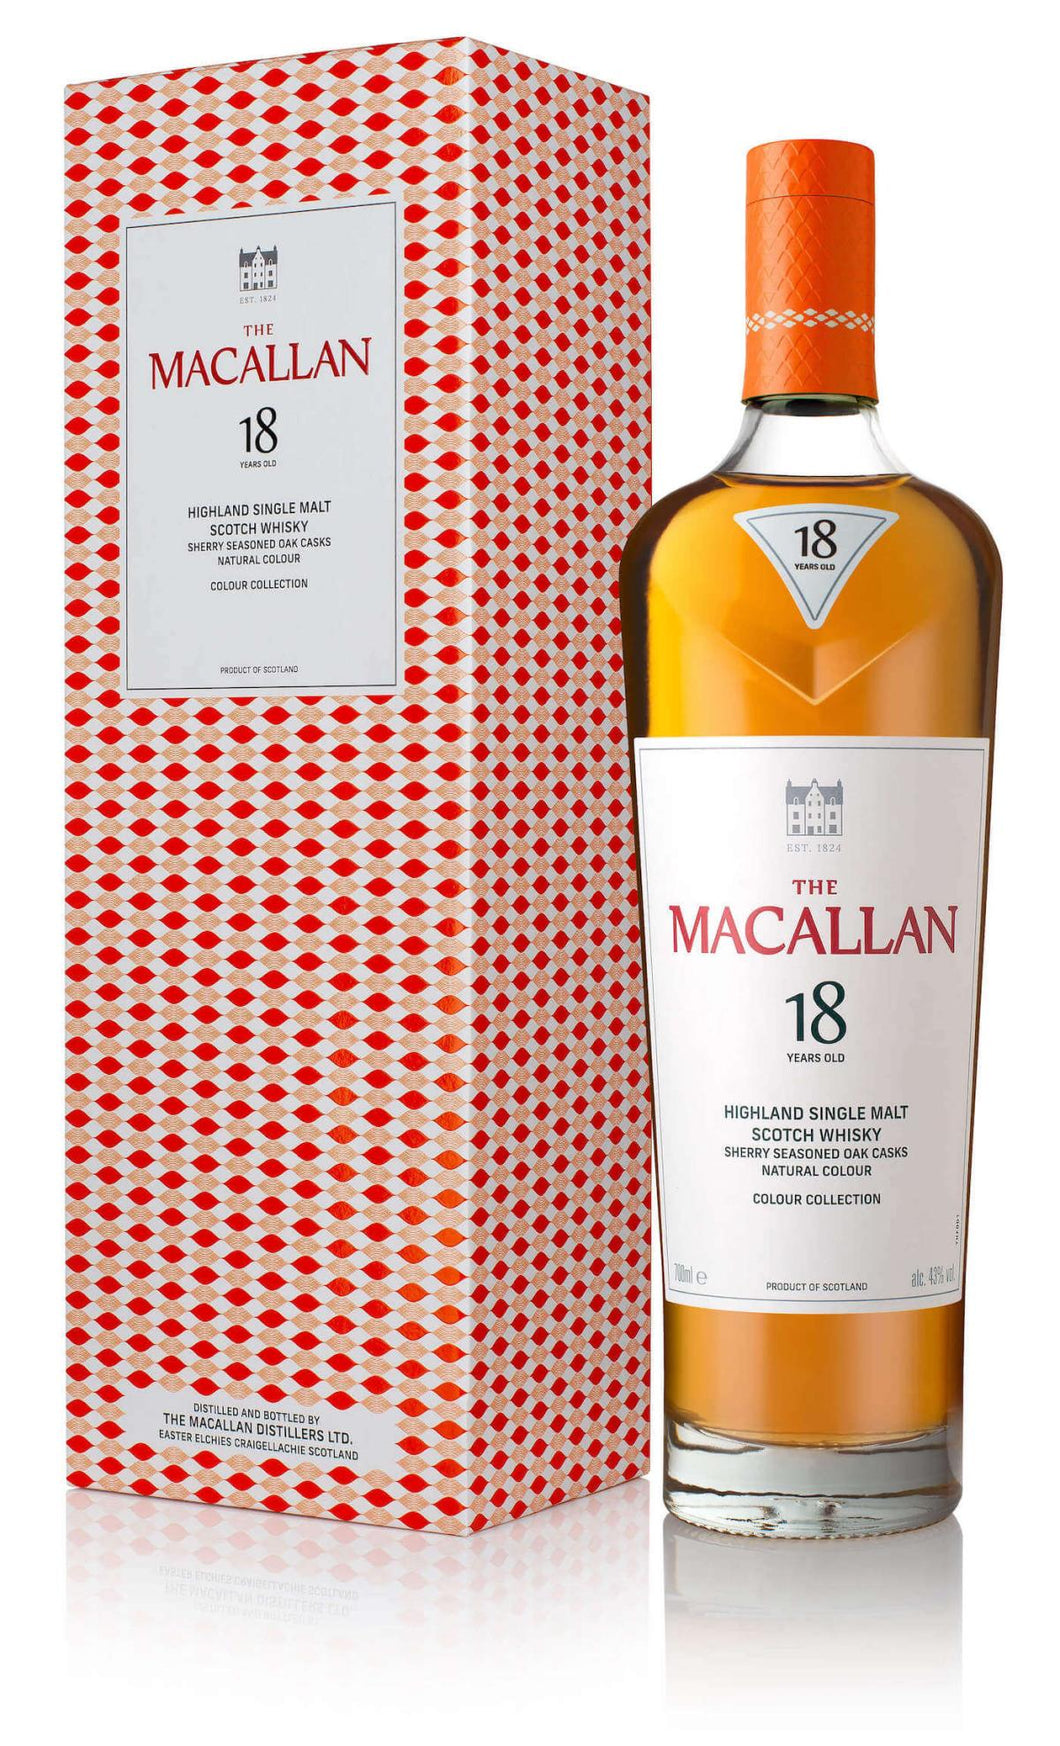 Macallan Colour Collection 18 Year Old Single Malt Scotch Whisky 750ml